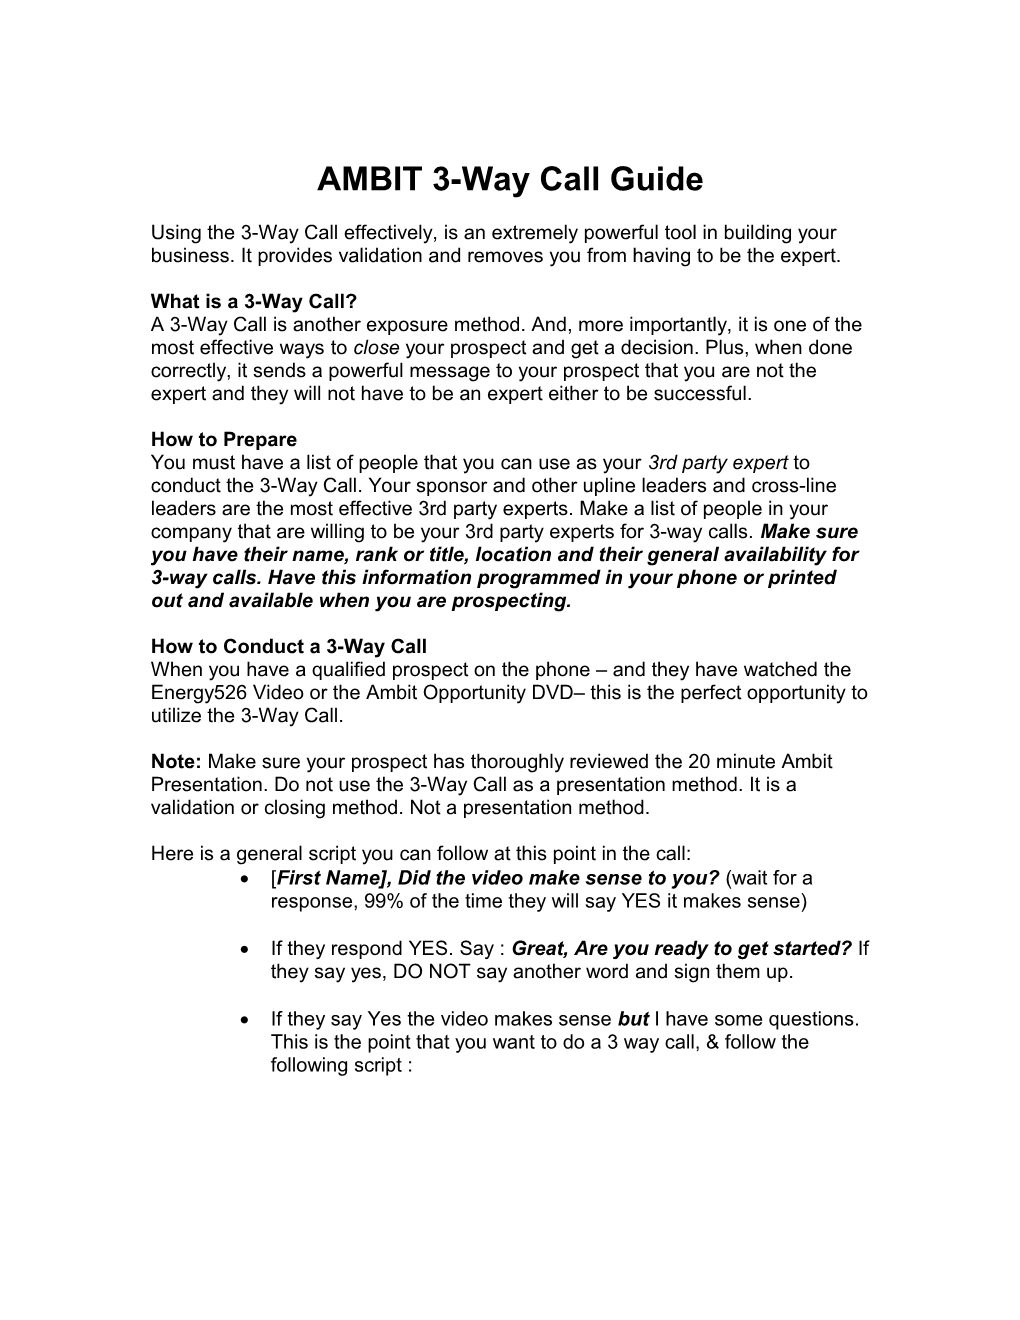 AMBIT 3-Way Call Guide